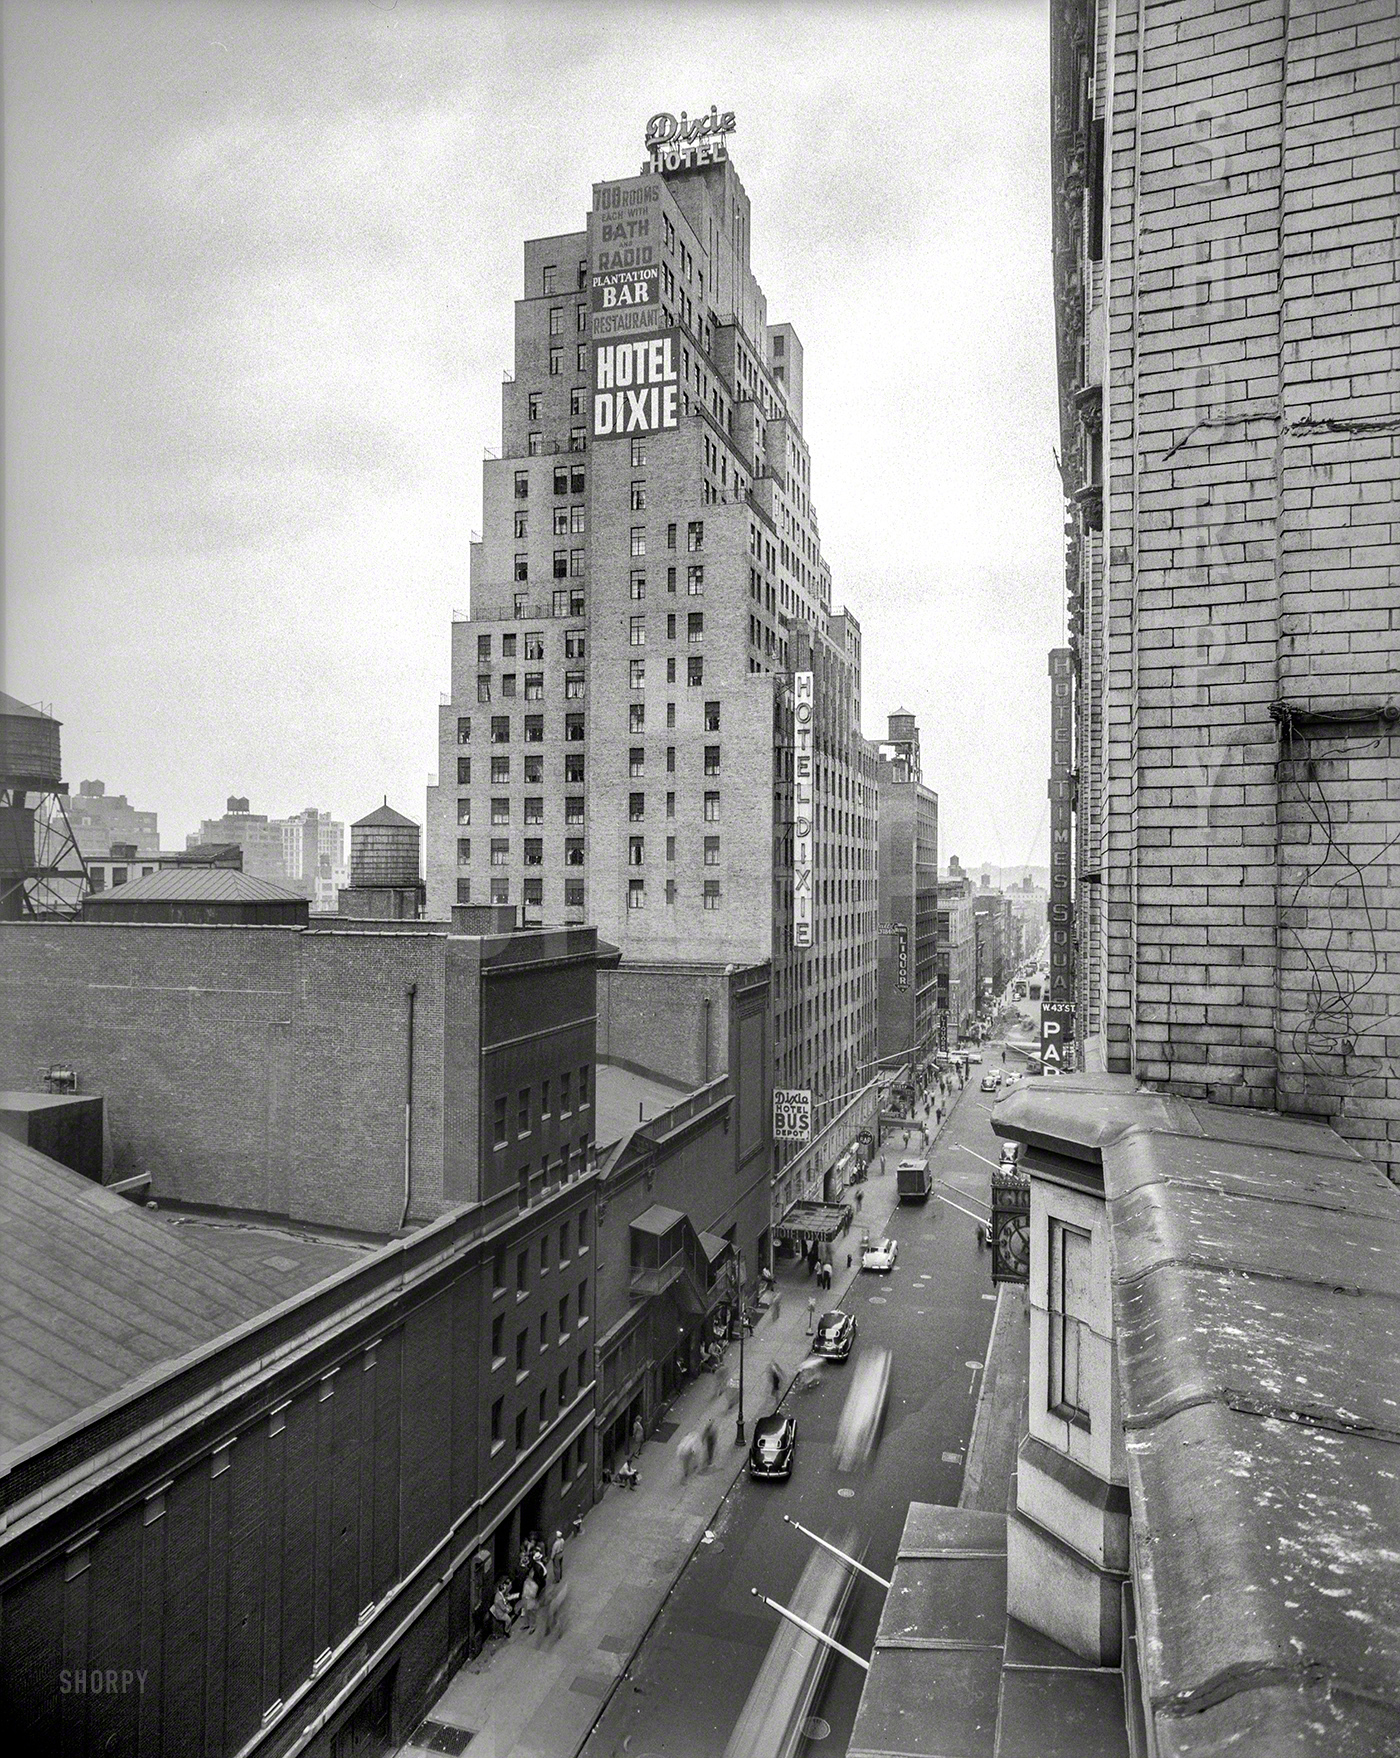 New York's 43rd Street, just off Times Square, circa 1950. "Hotel Dixie -- 700 rooms, each with bath and radio." Not to mention their own bus depot. Now the somewhat infamous Hotel Carter. 4x5 negative by James M. Fox. View full size.